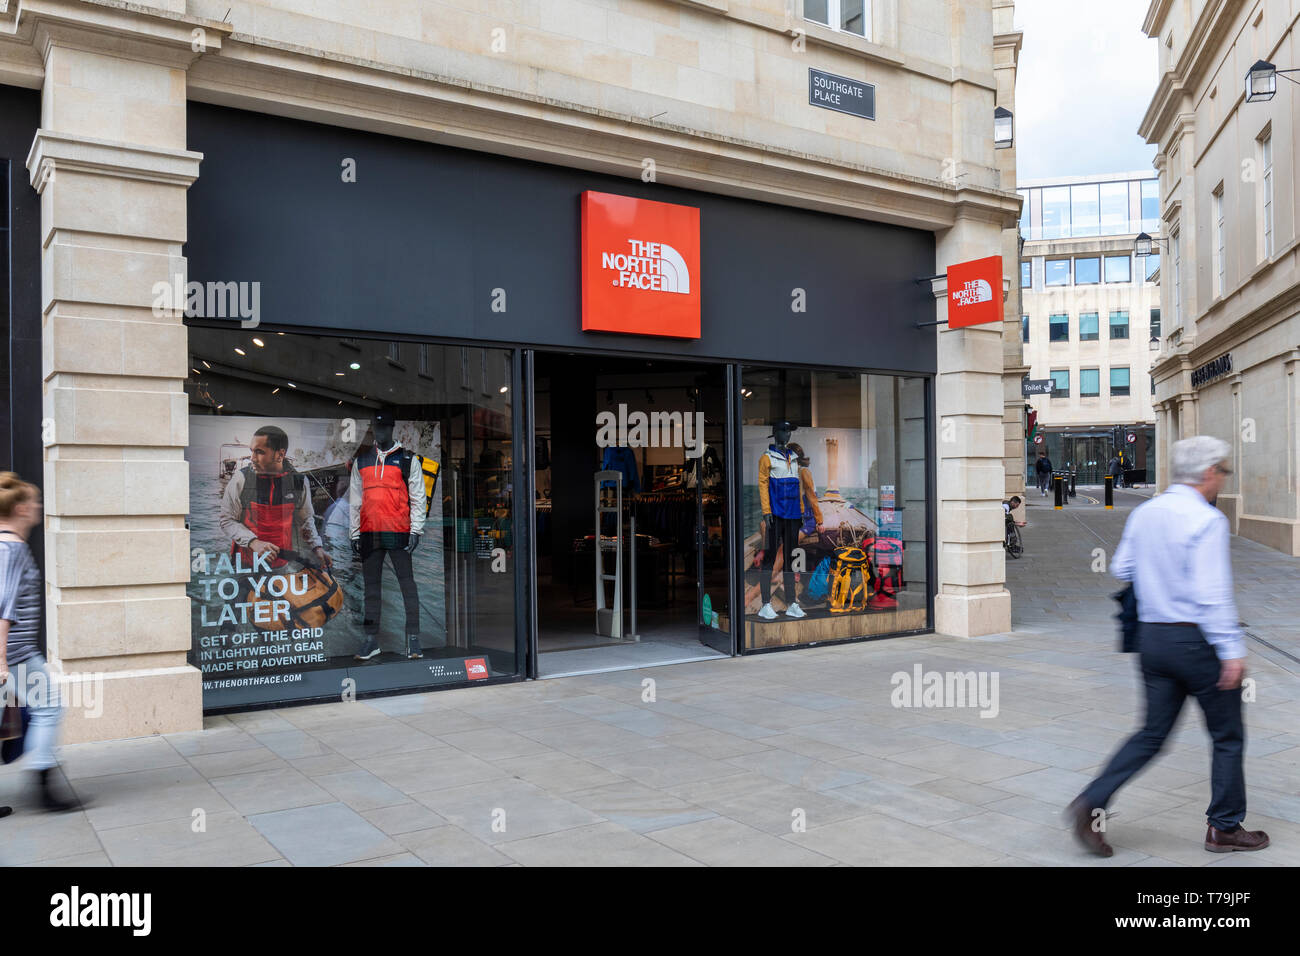 The North Face Shop High Resolution Stock Photography and Images - Alamy